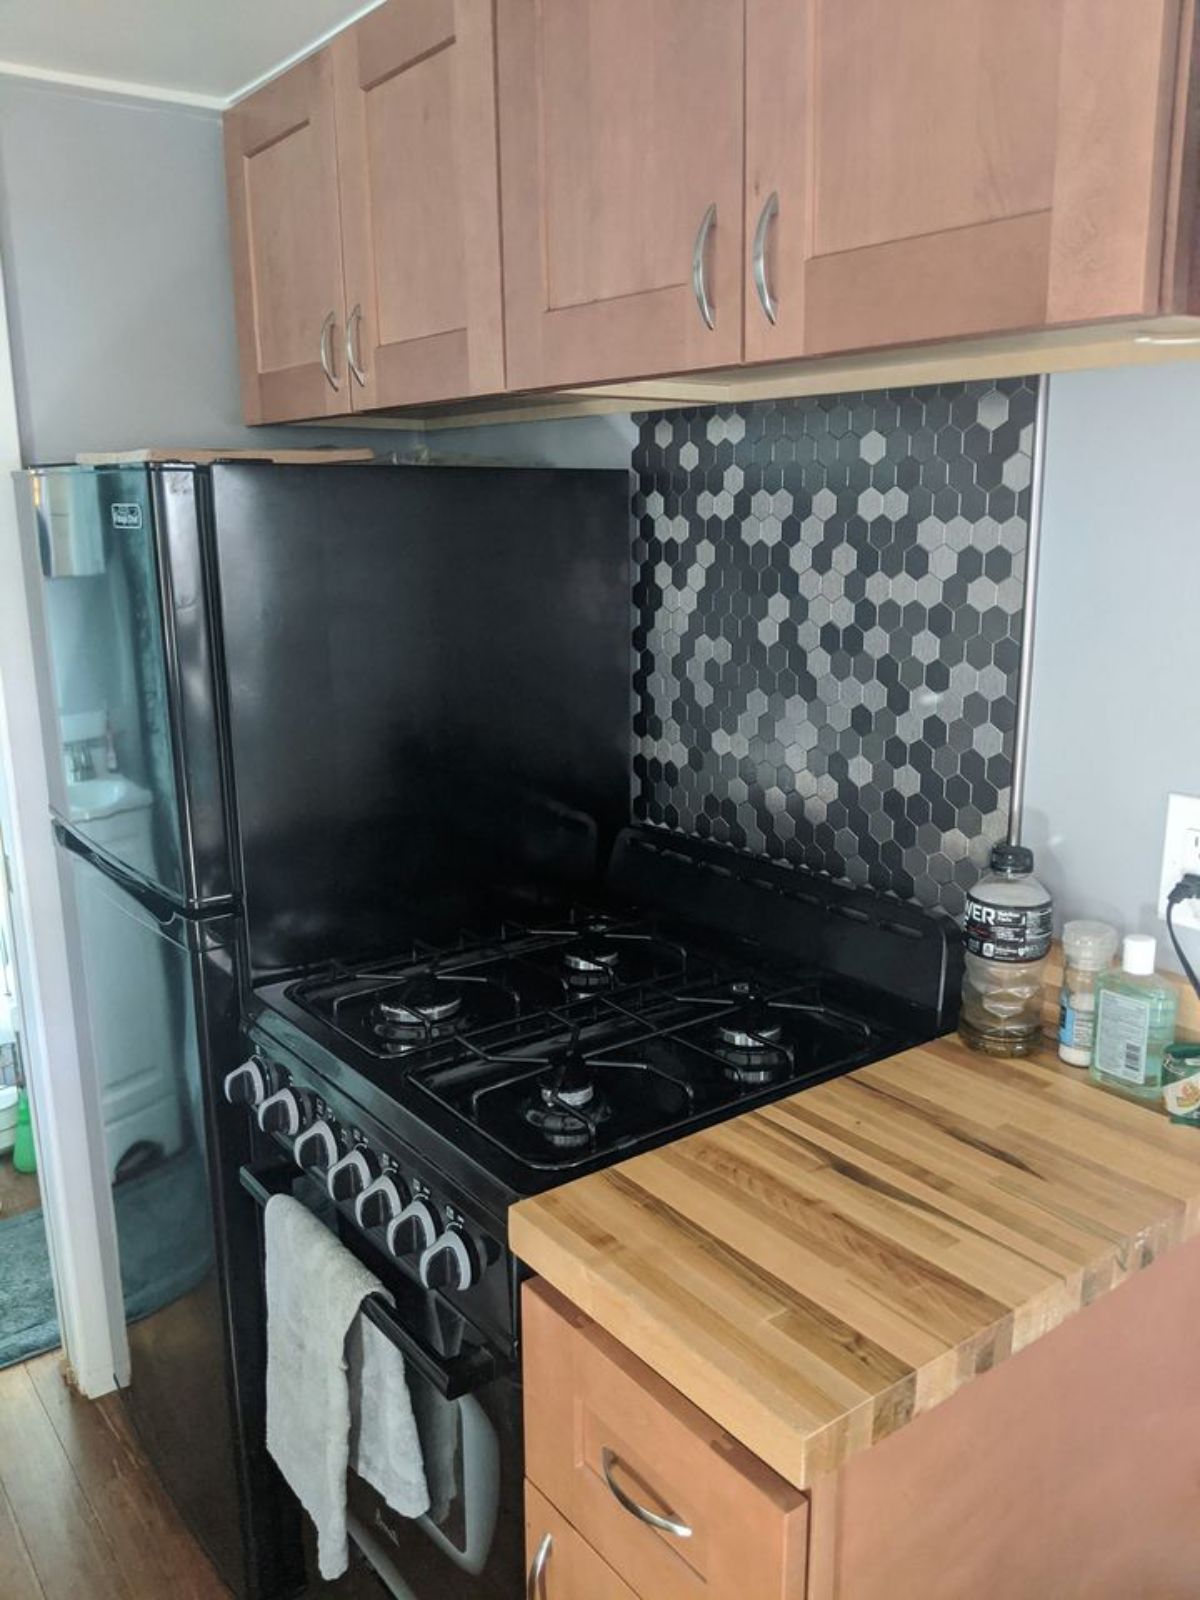 Kitchen of of 196 sf Tiny House on Wheels has propane burner cum oven